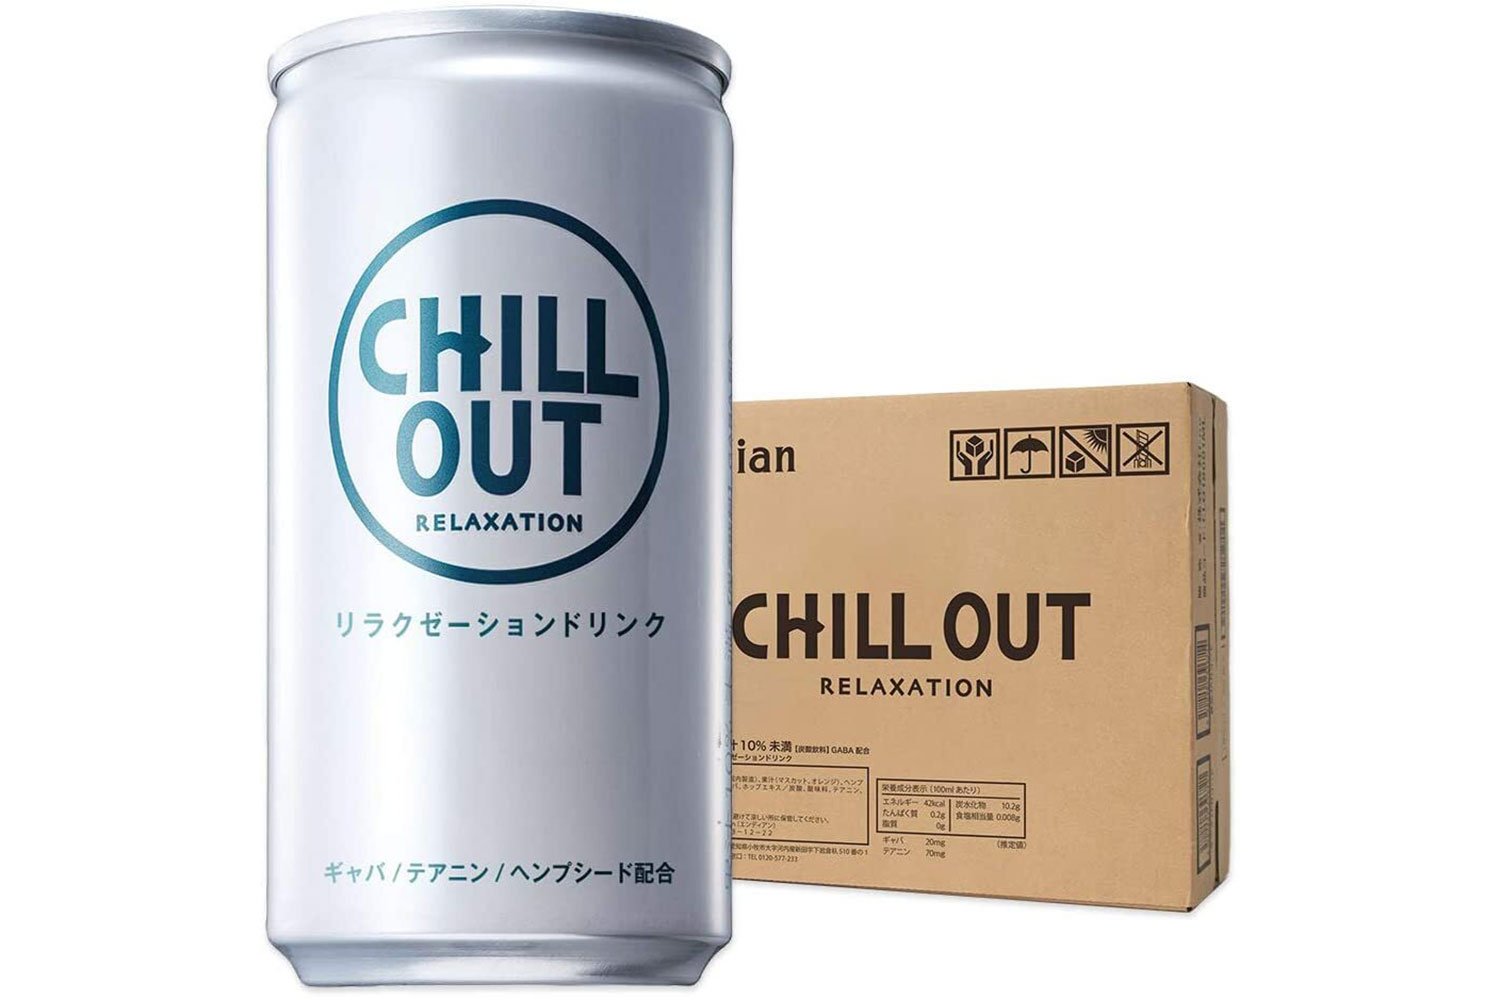 chillout　こりゃいいぜ